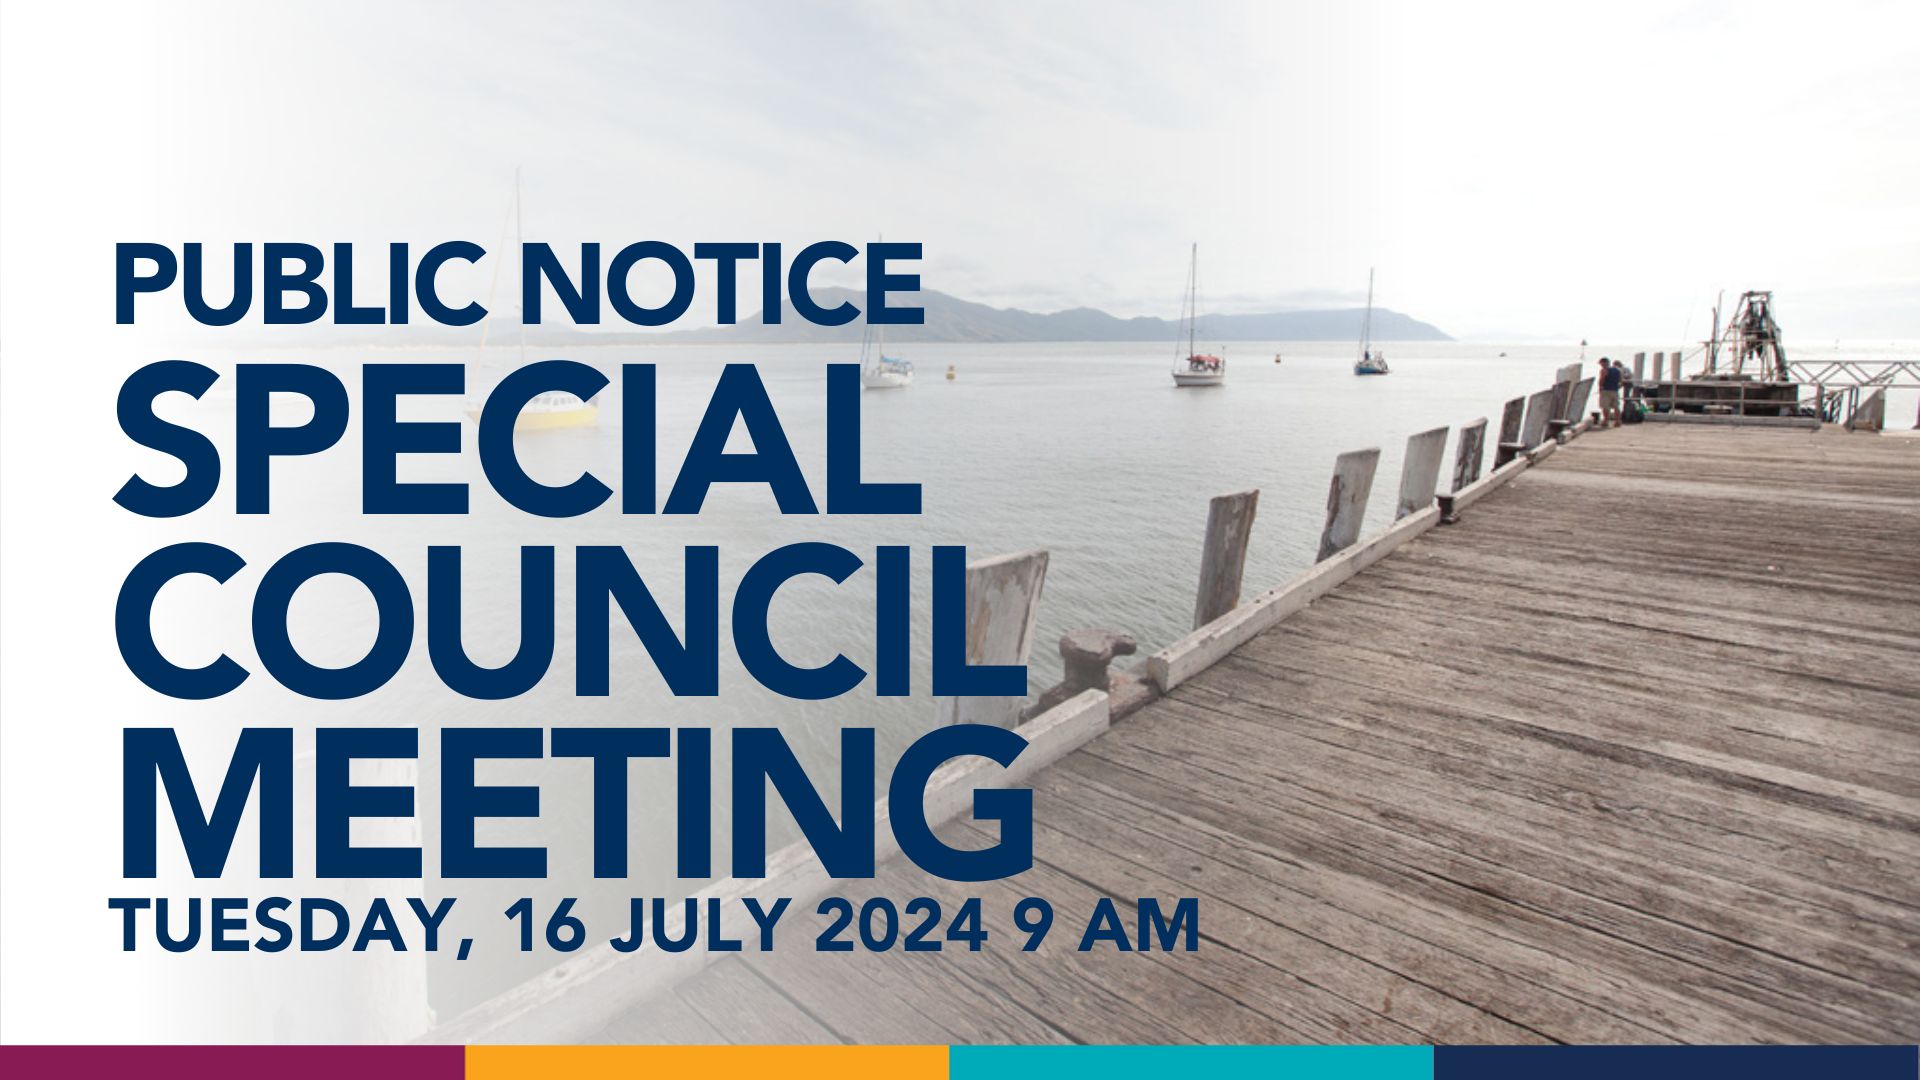 Notification of Special Meeting of Council